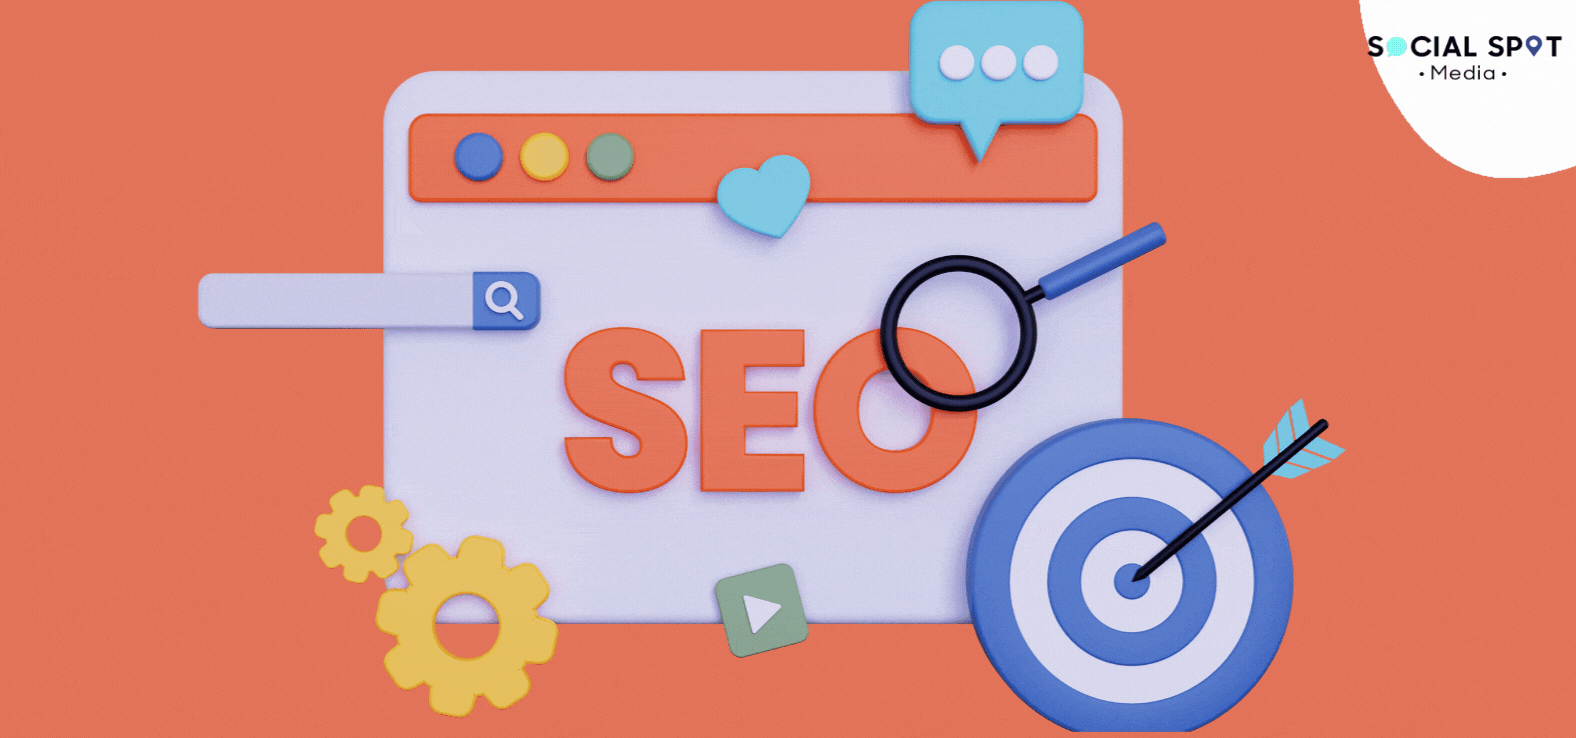 How to Find the Best SEO Company Online? - Social Spot Media